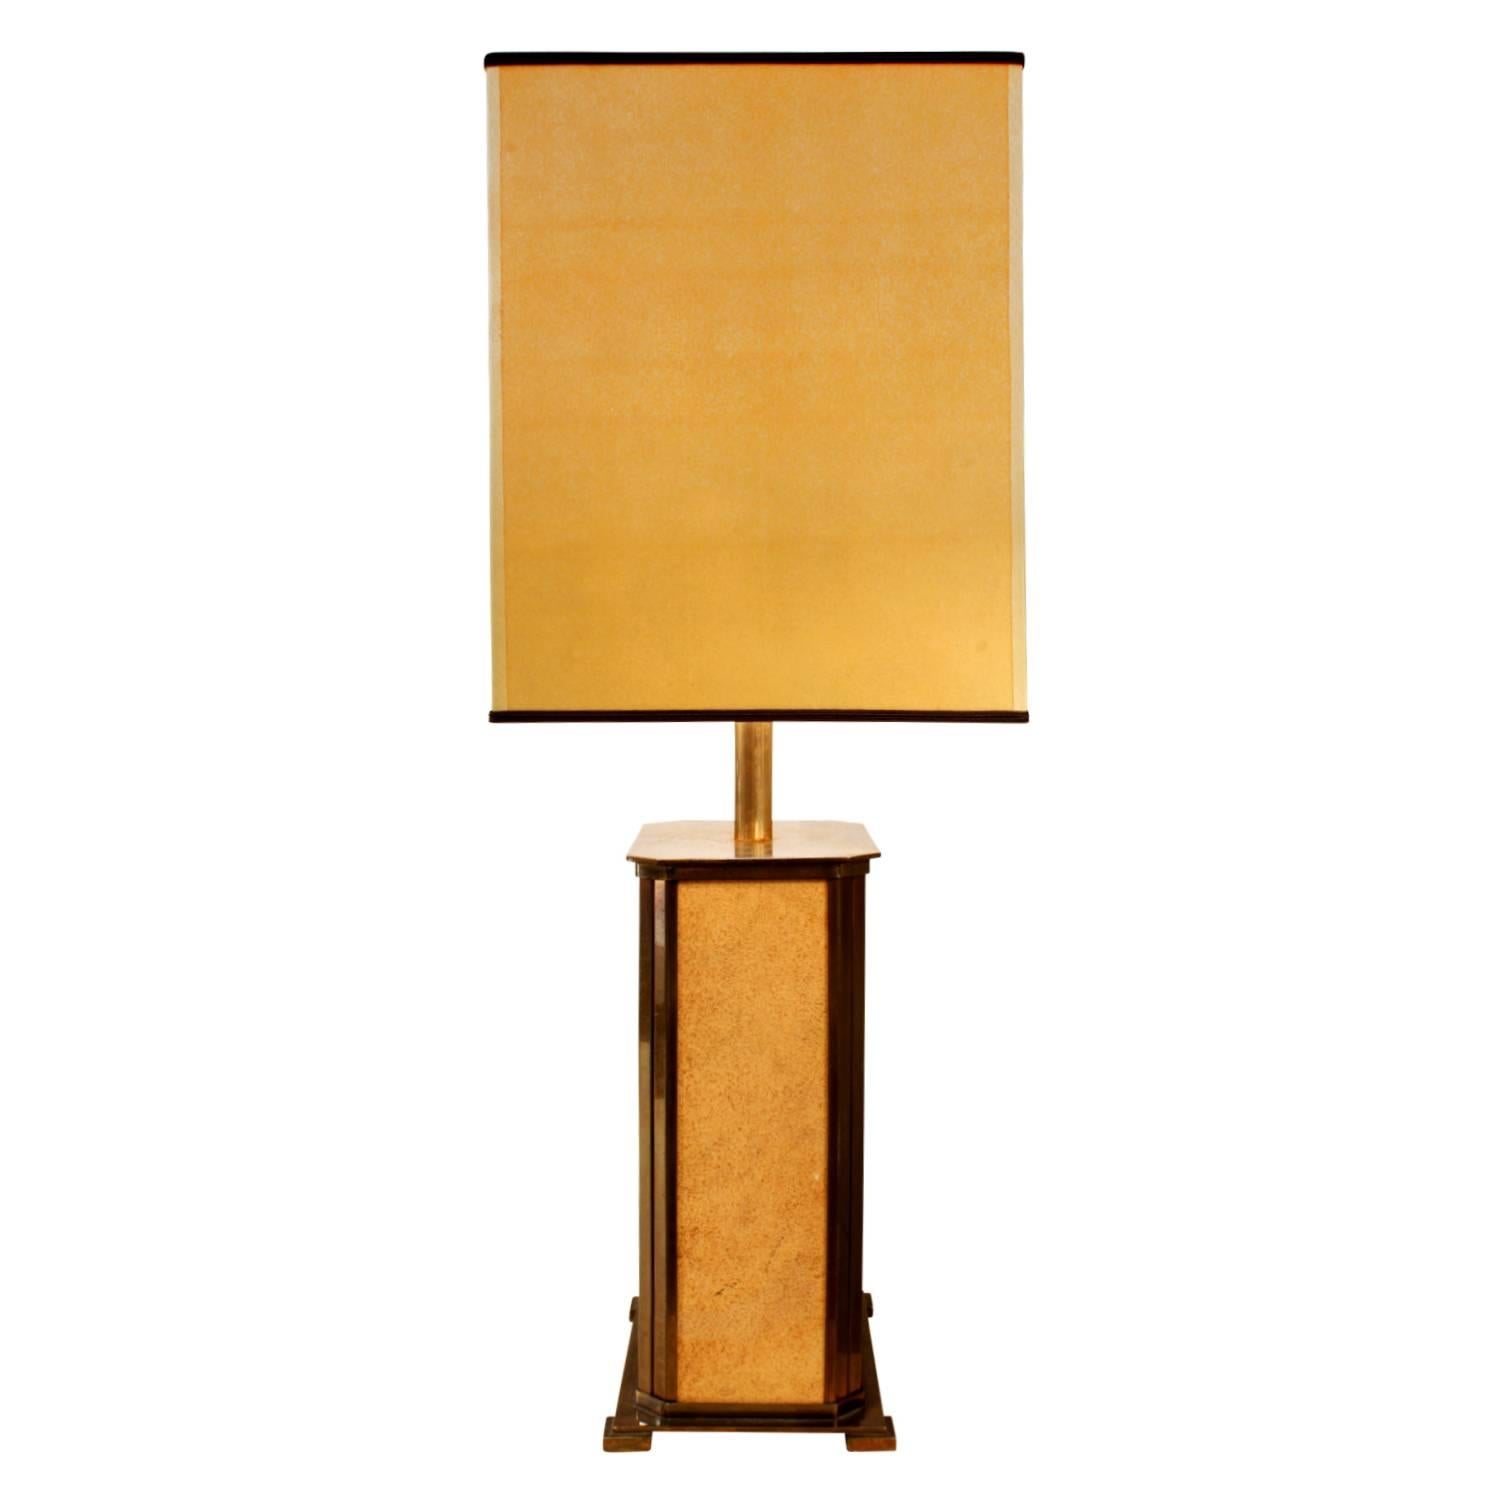 French Roger Capron Garrigue Tile Table Lamp, 1960s